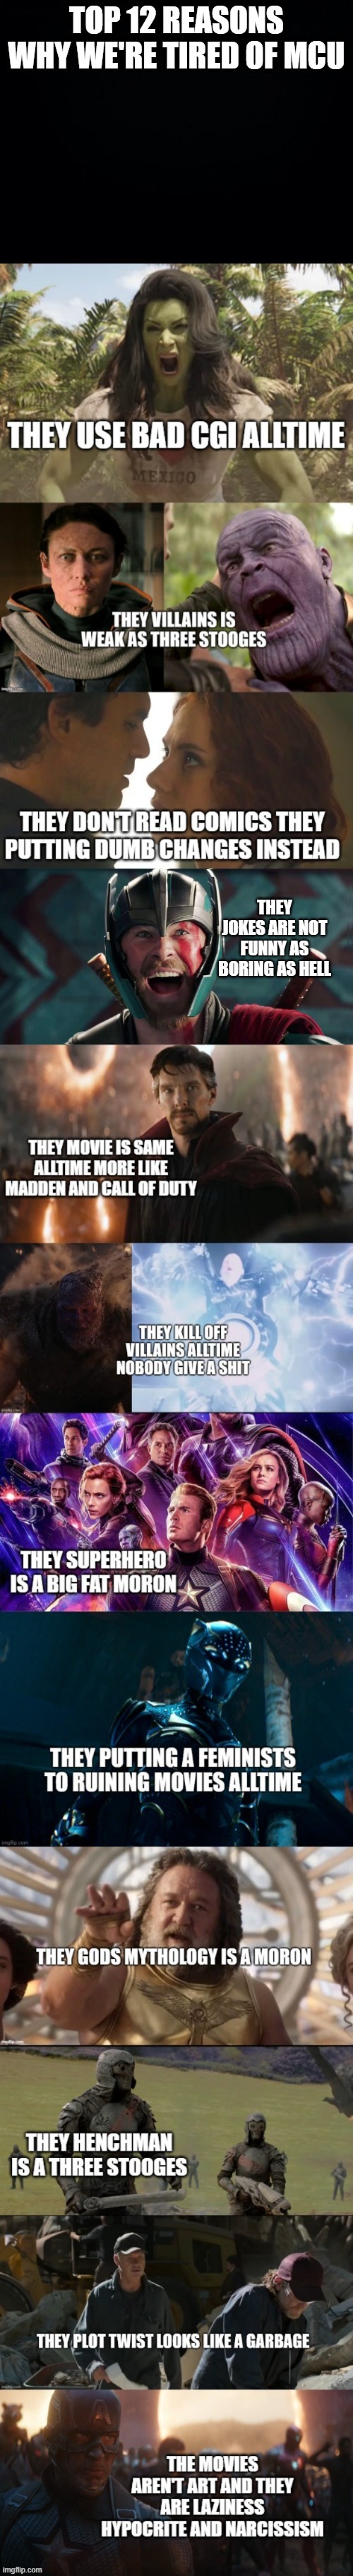 top 12 reasons why We're tired of mcu | THEY JOKES ARE NOT FUNNY AS BORING AS HELL | image tagged in google search | made w/ Imgflip meme maker